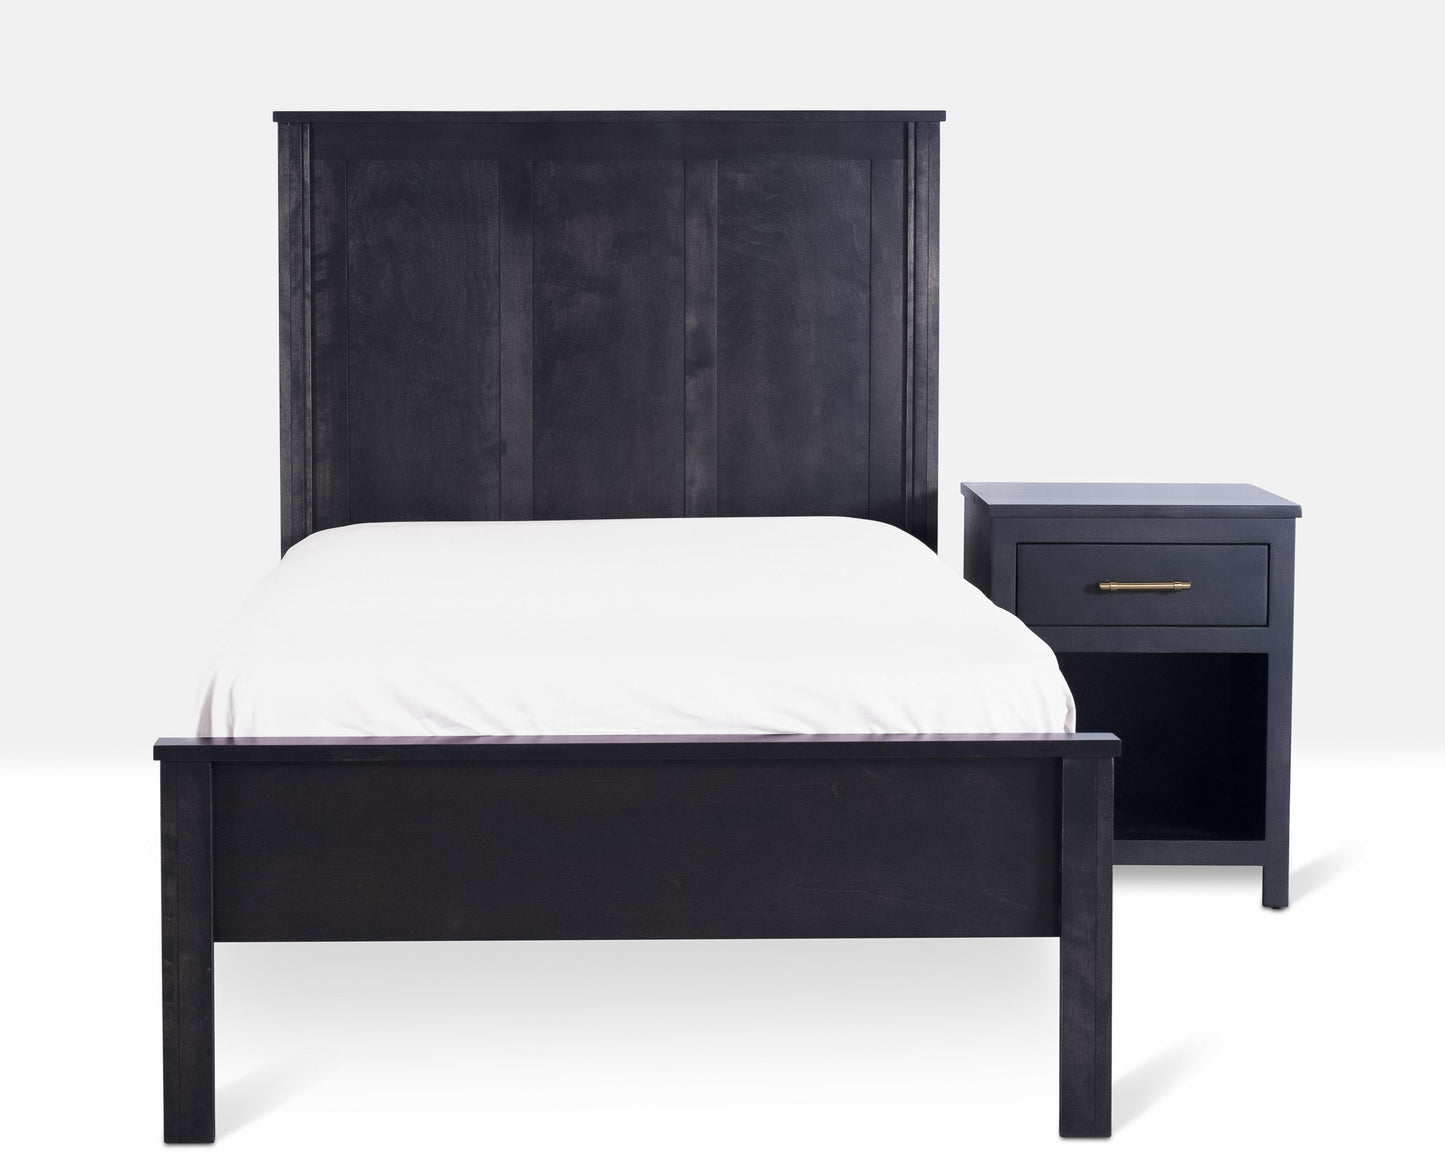 Acadia Tremont Platform Bed with Simple footboard, shown from the front with a one drawer nightstand, in Nitefall finish.